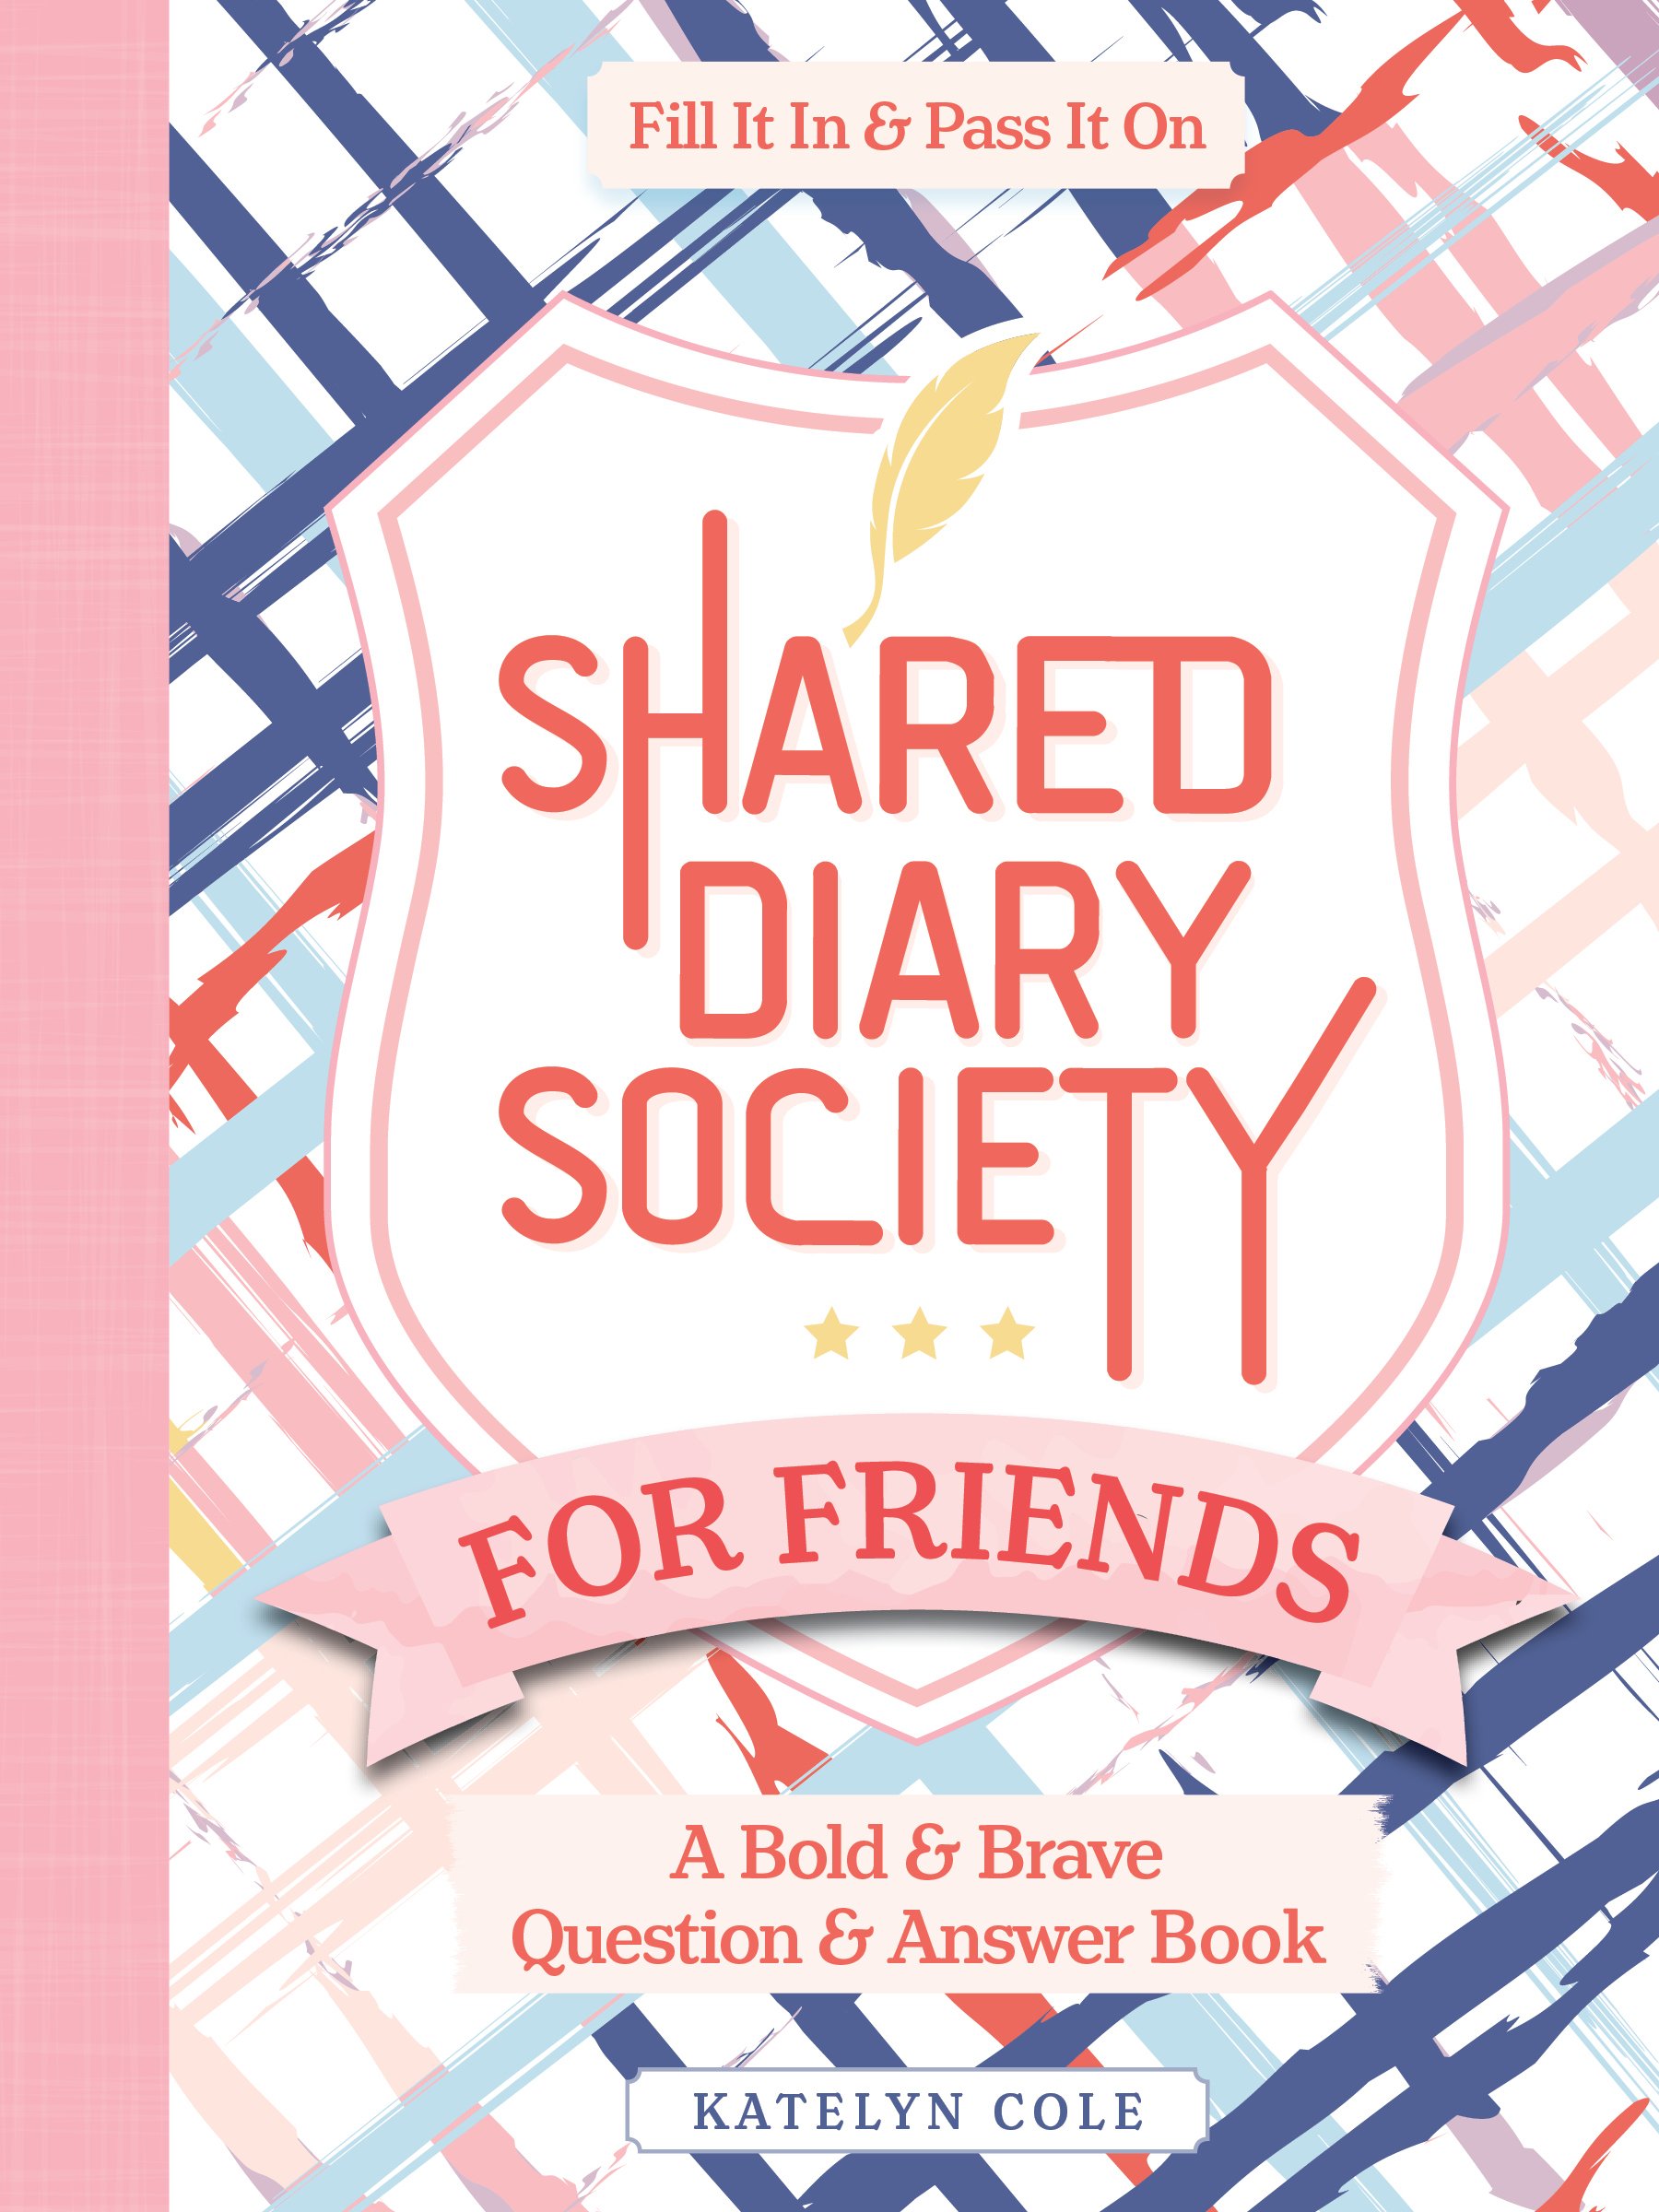 Shared Diary Society for Friends_Cover 978-0-7643-6715-1.jpg